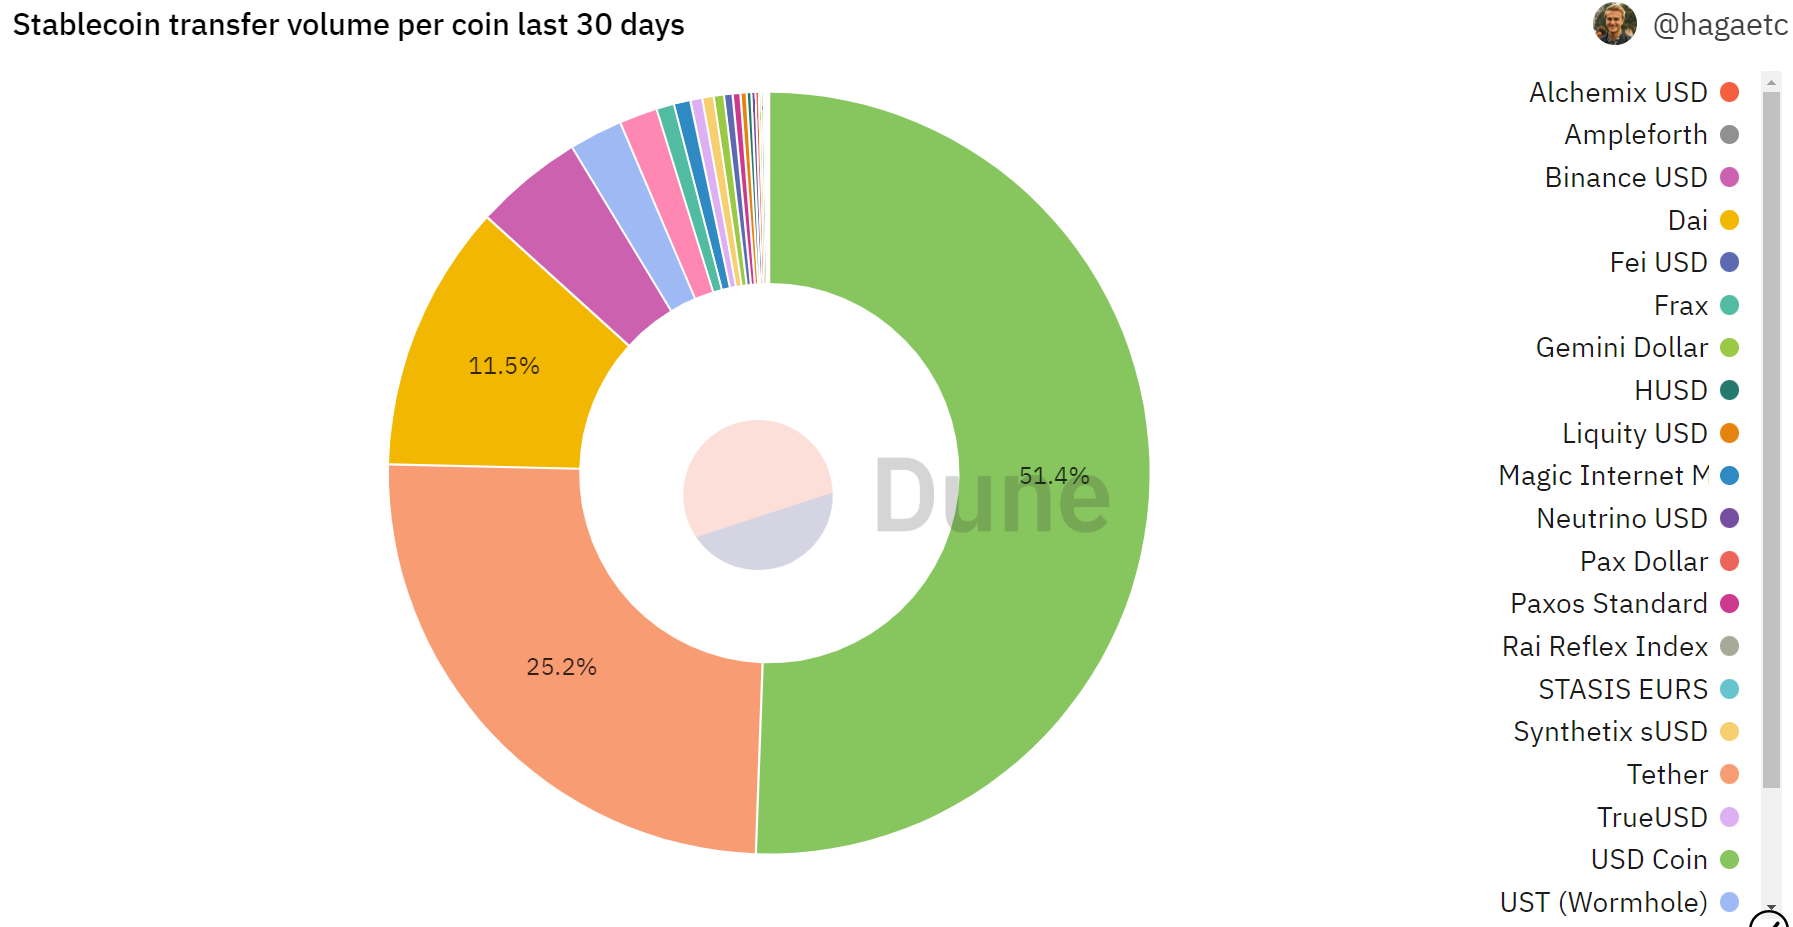 Stablecoin volumes